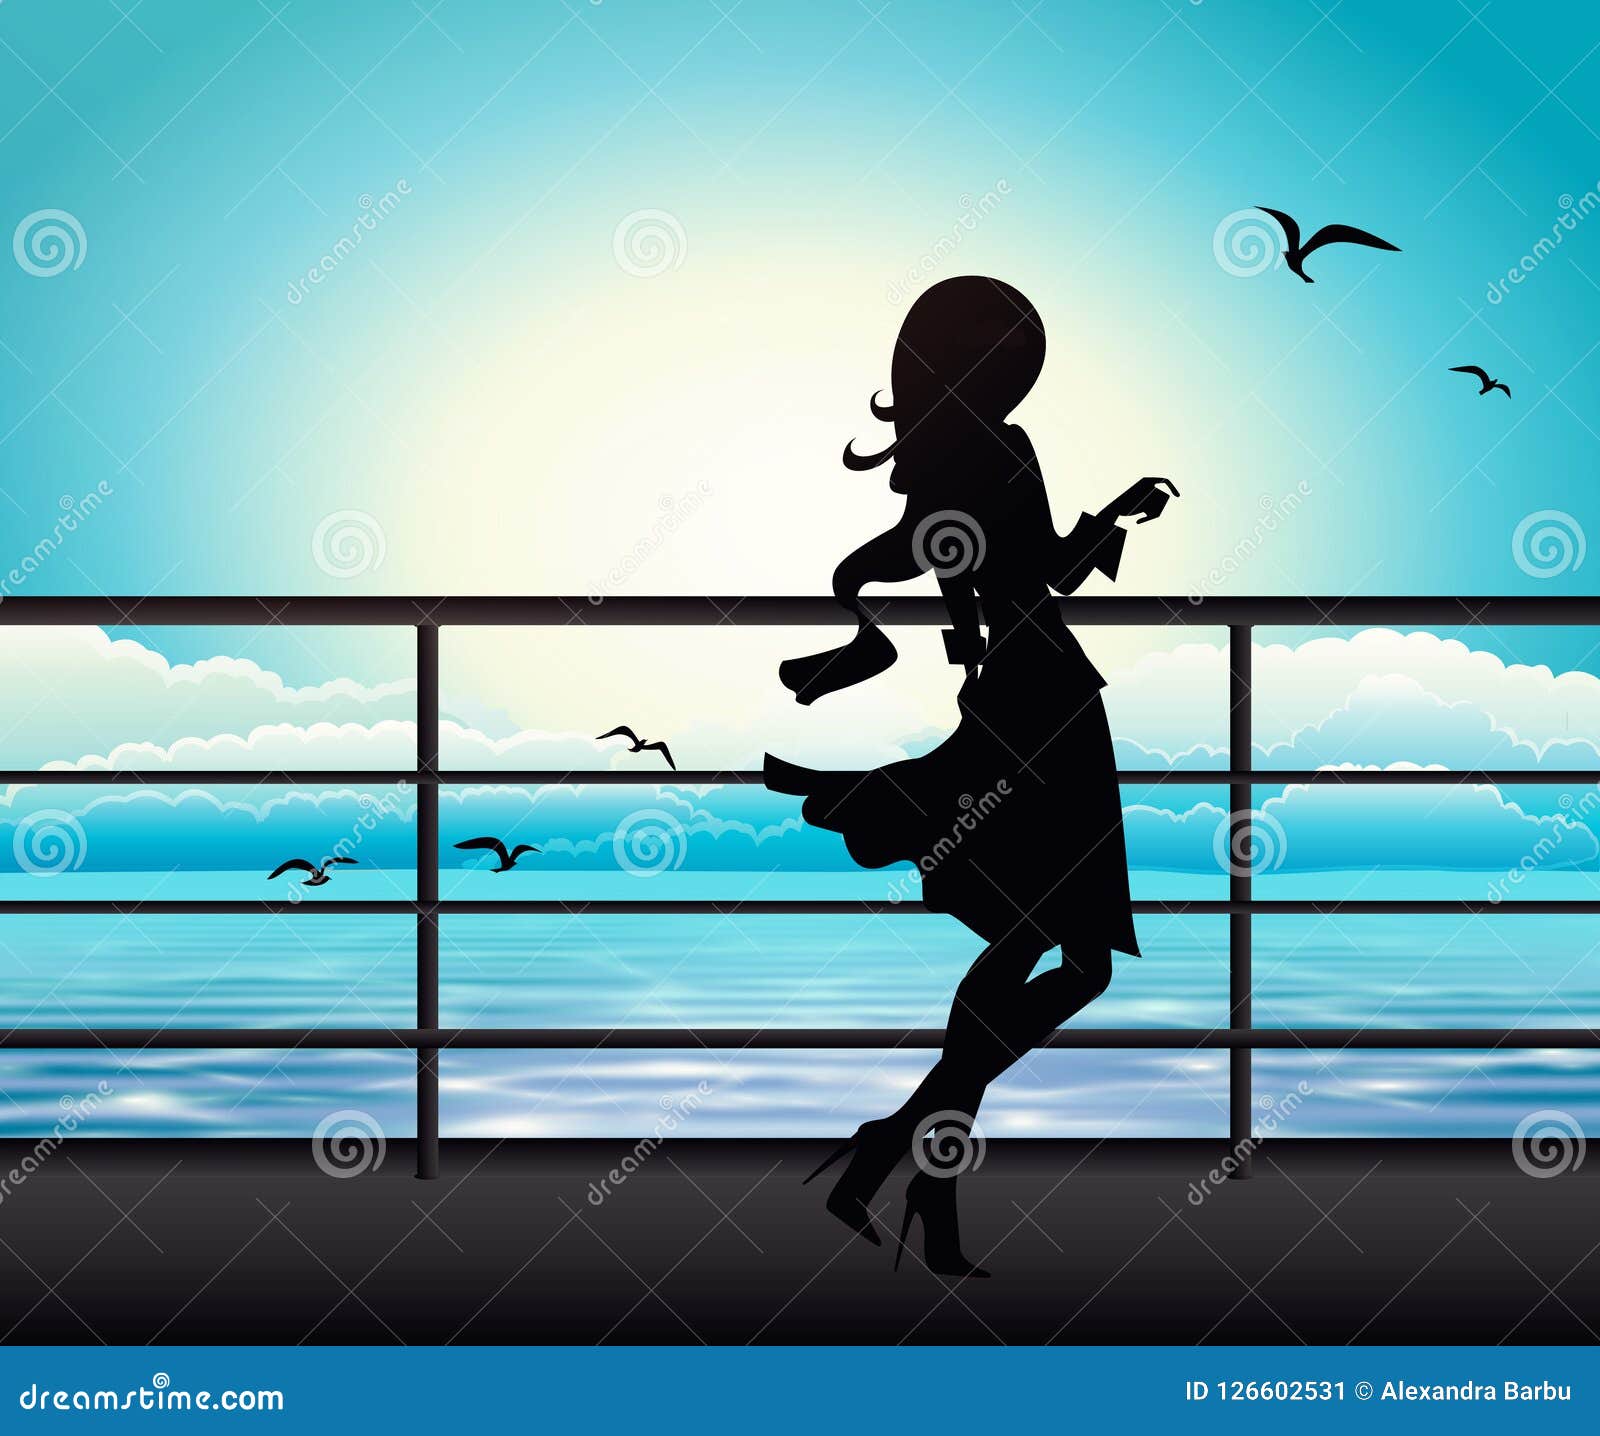 elegant woman silhouette on a ferry boat